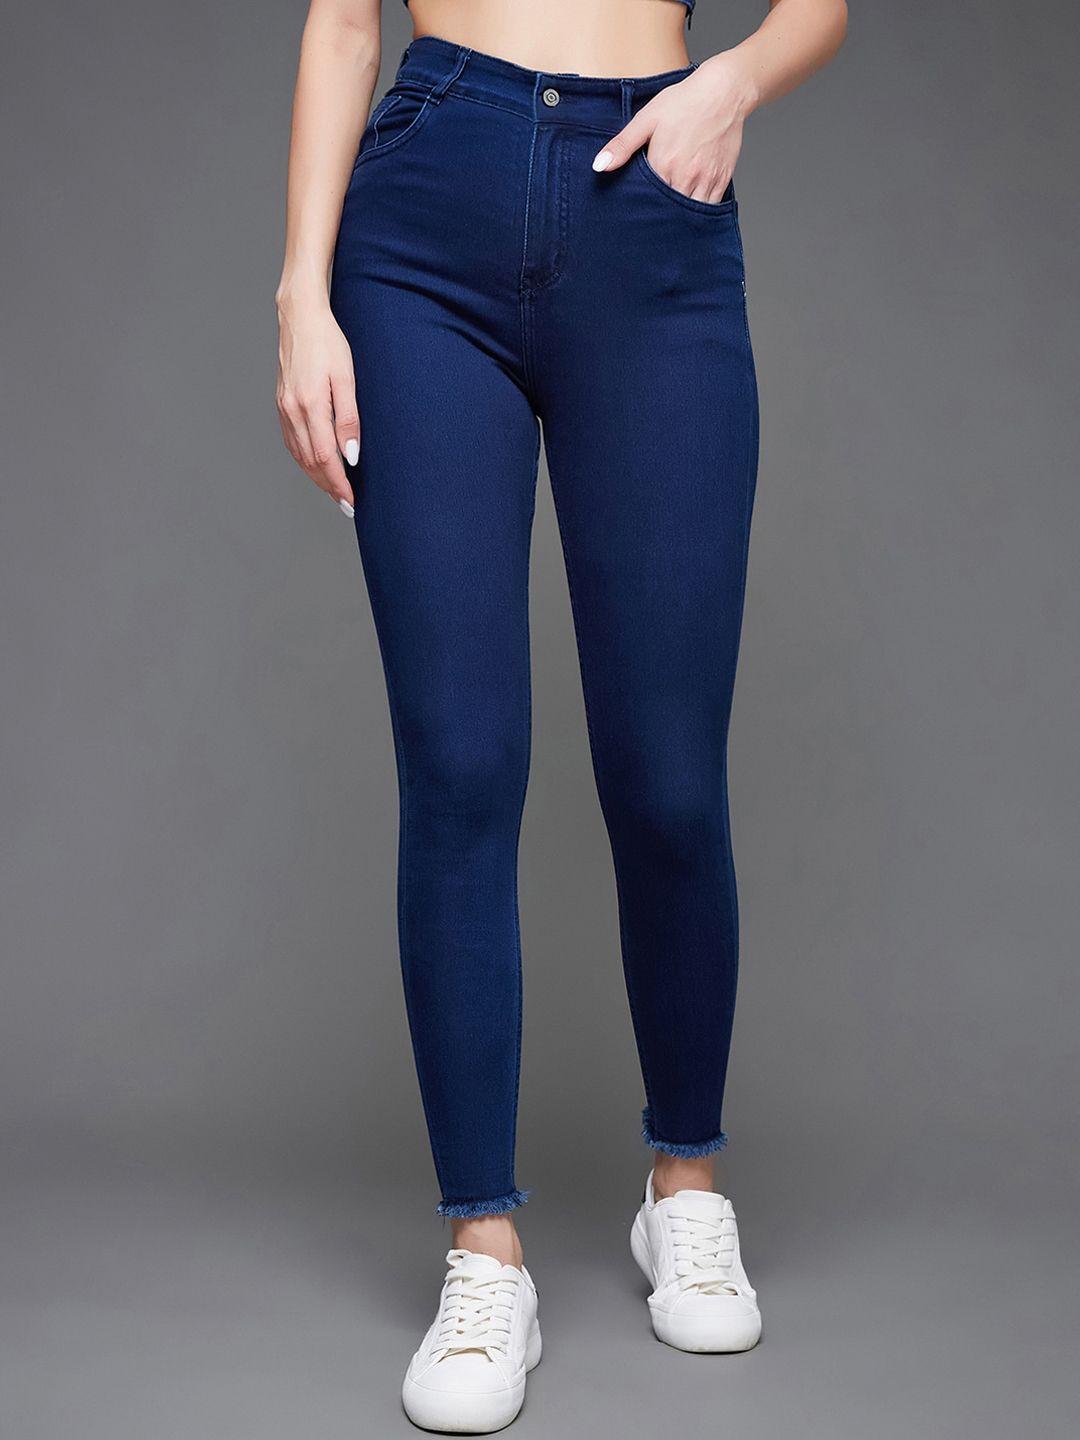 Miss Chase Women Skinny Fit High-Rise Clean Look Jeans